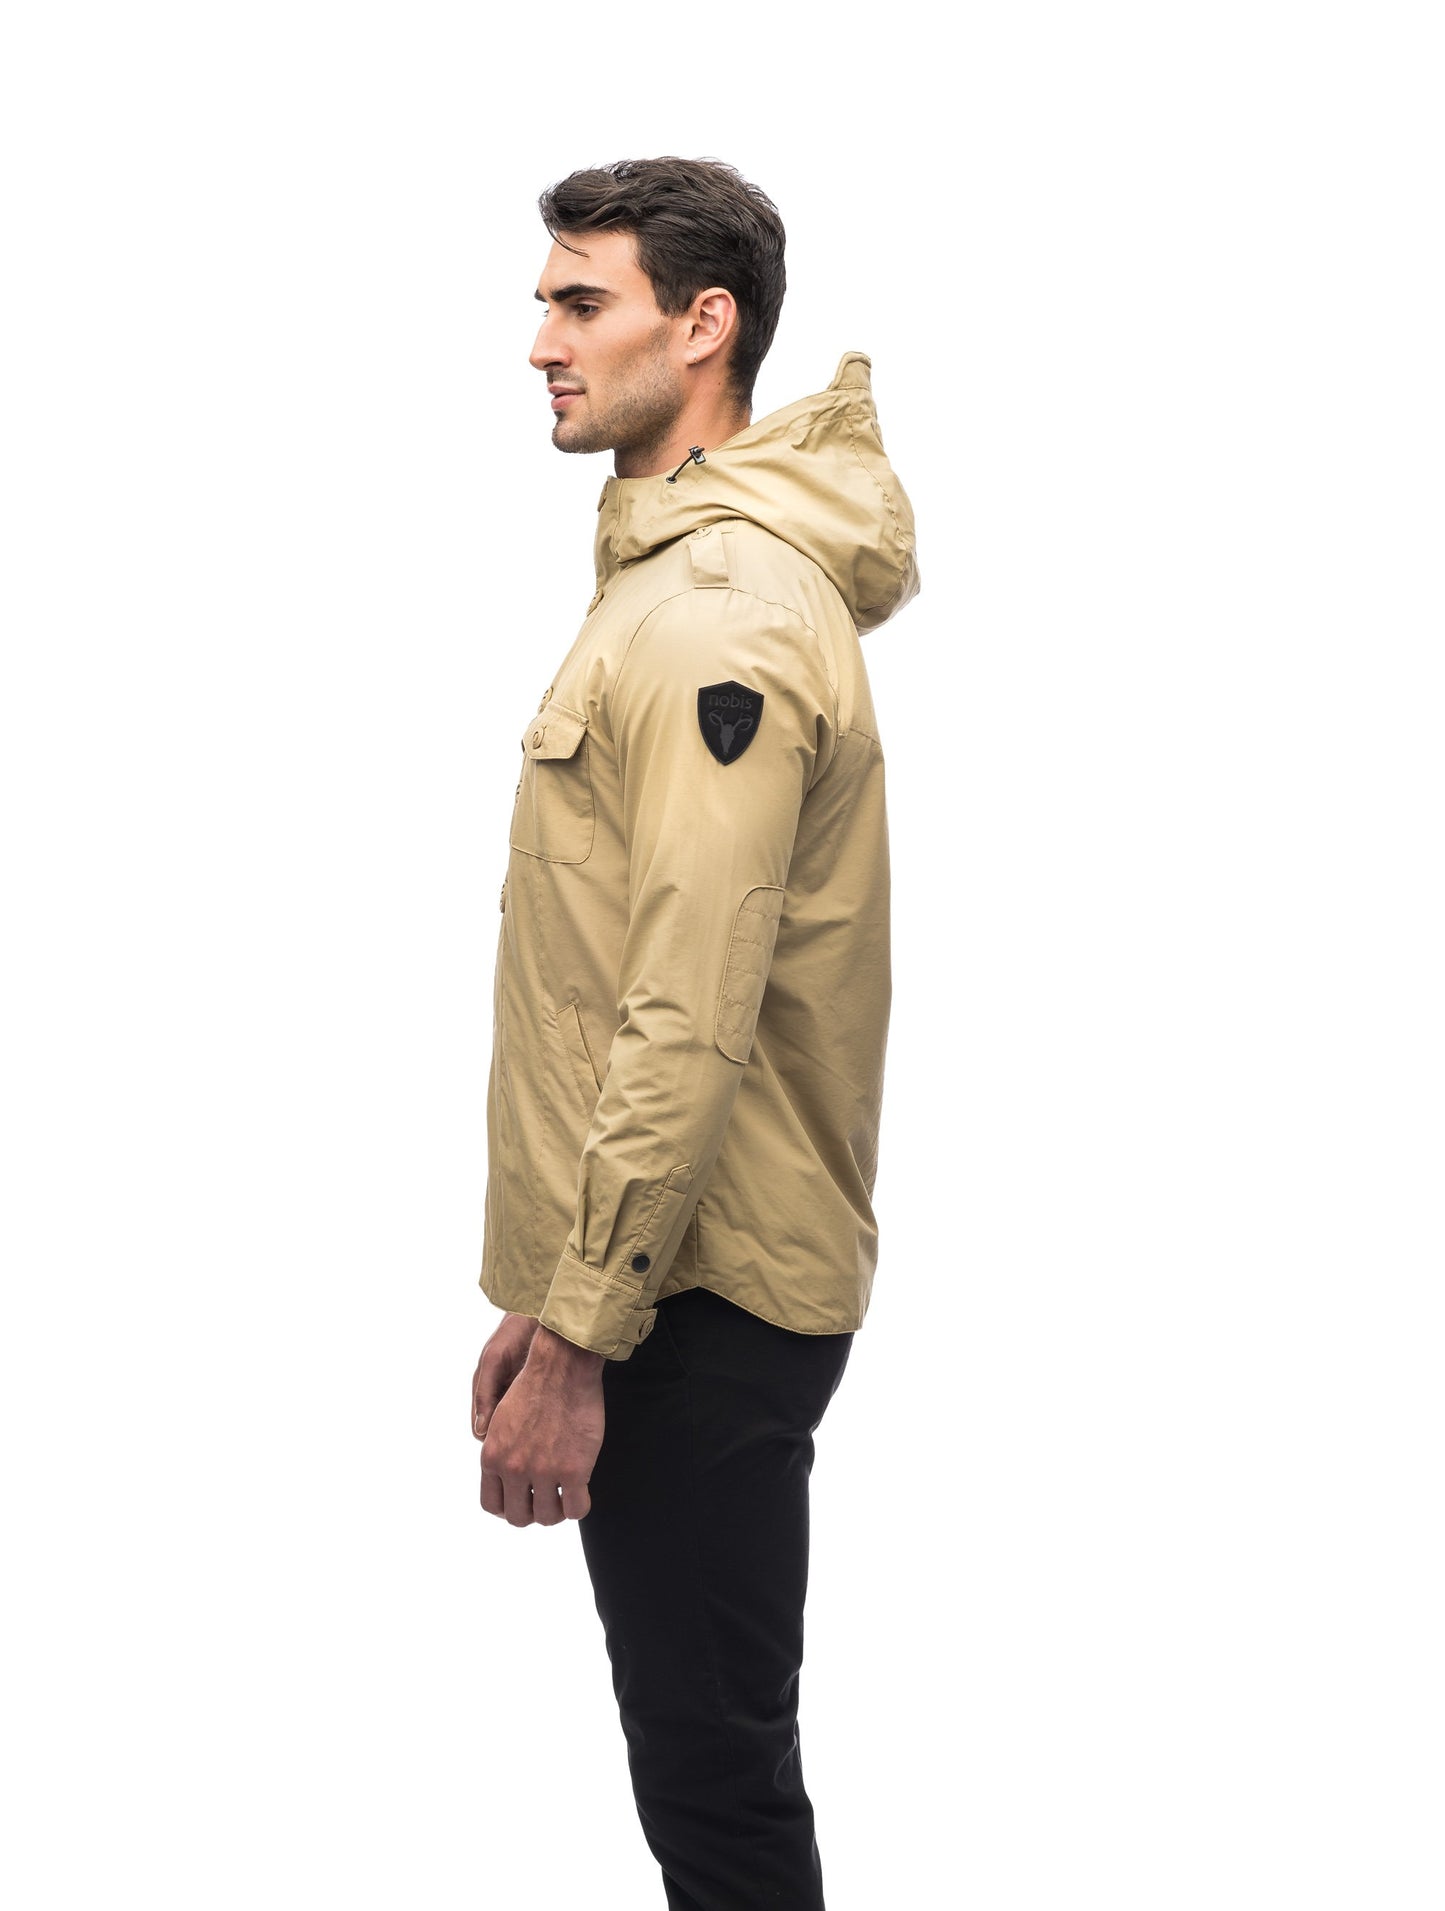 Men's hooded shirt jacket with patch chest pockets in Tan